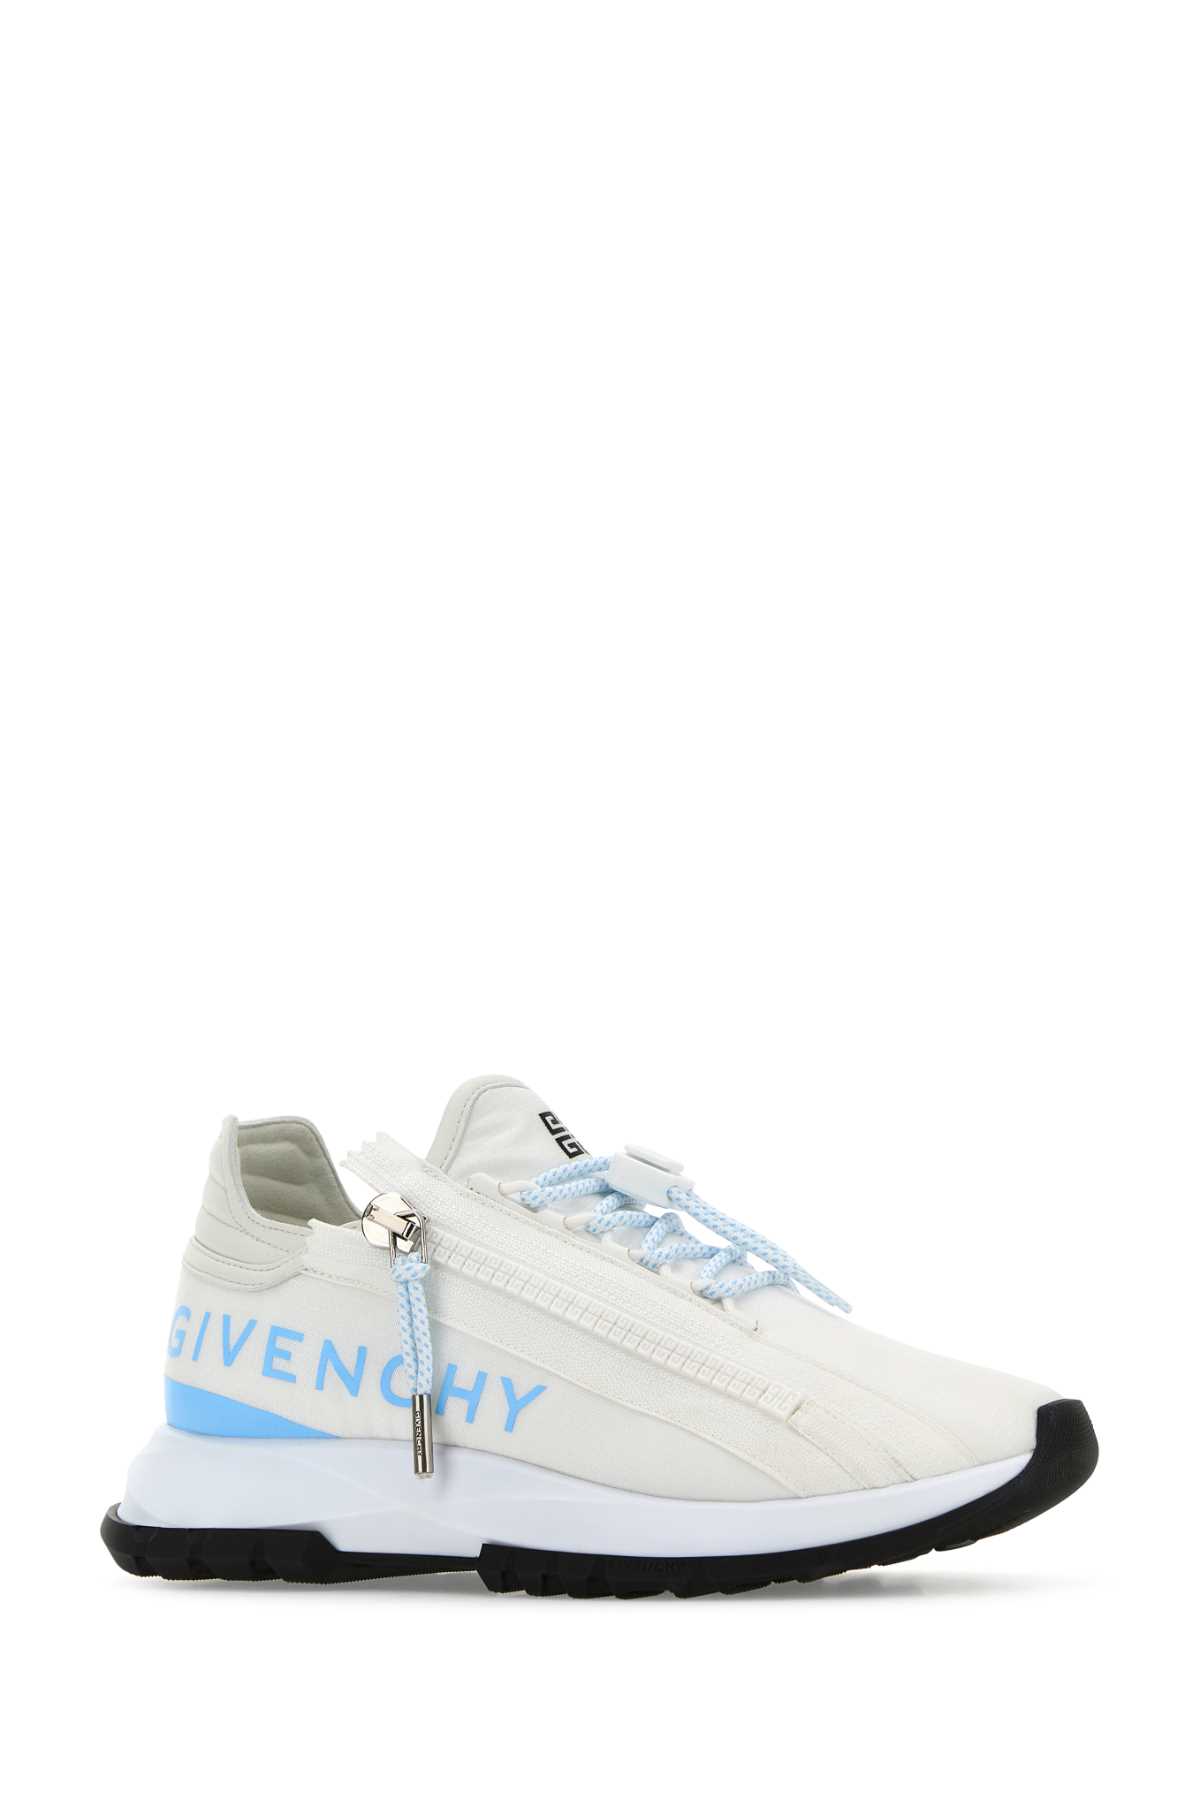 Shop Givenchy White Fabric And Leather Spectre Sneakers In Whiteblue